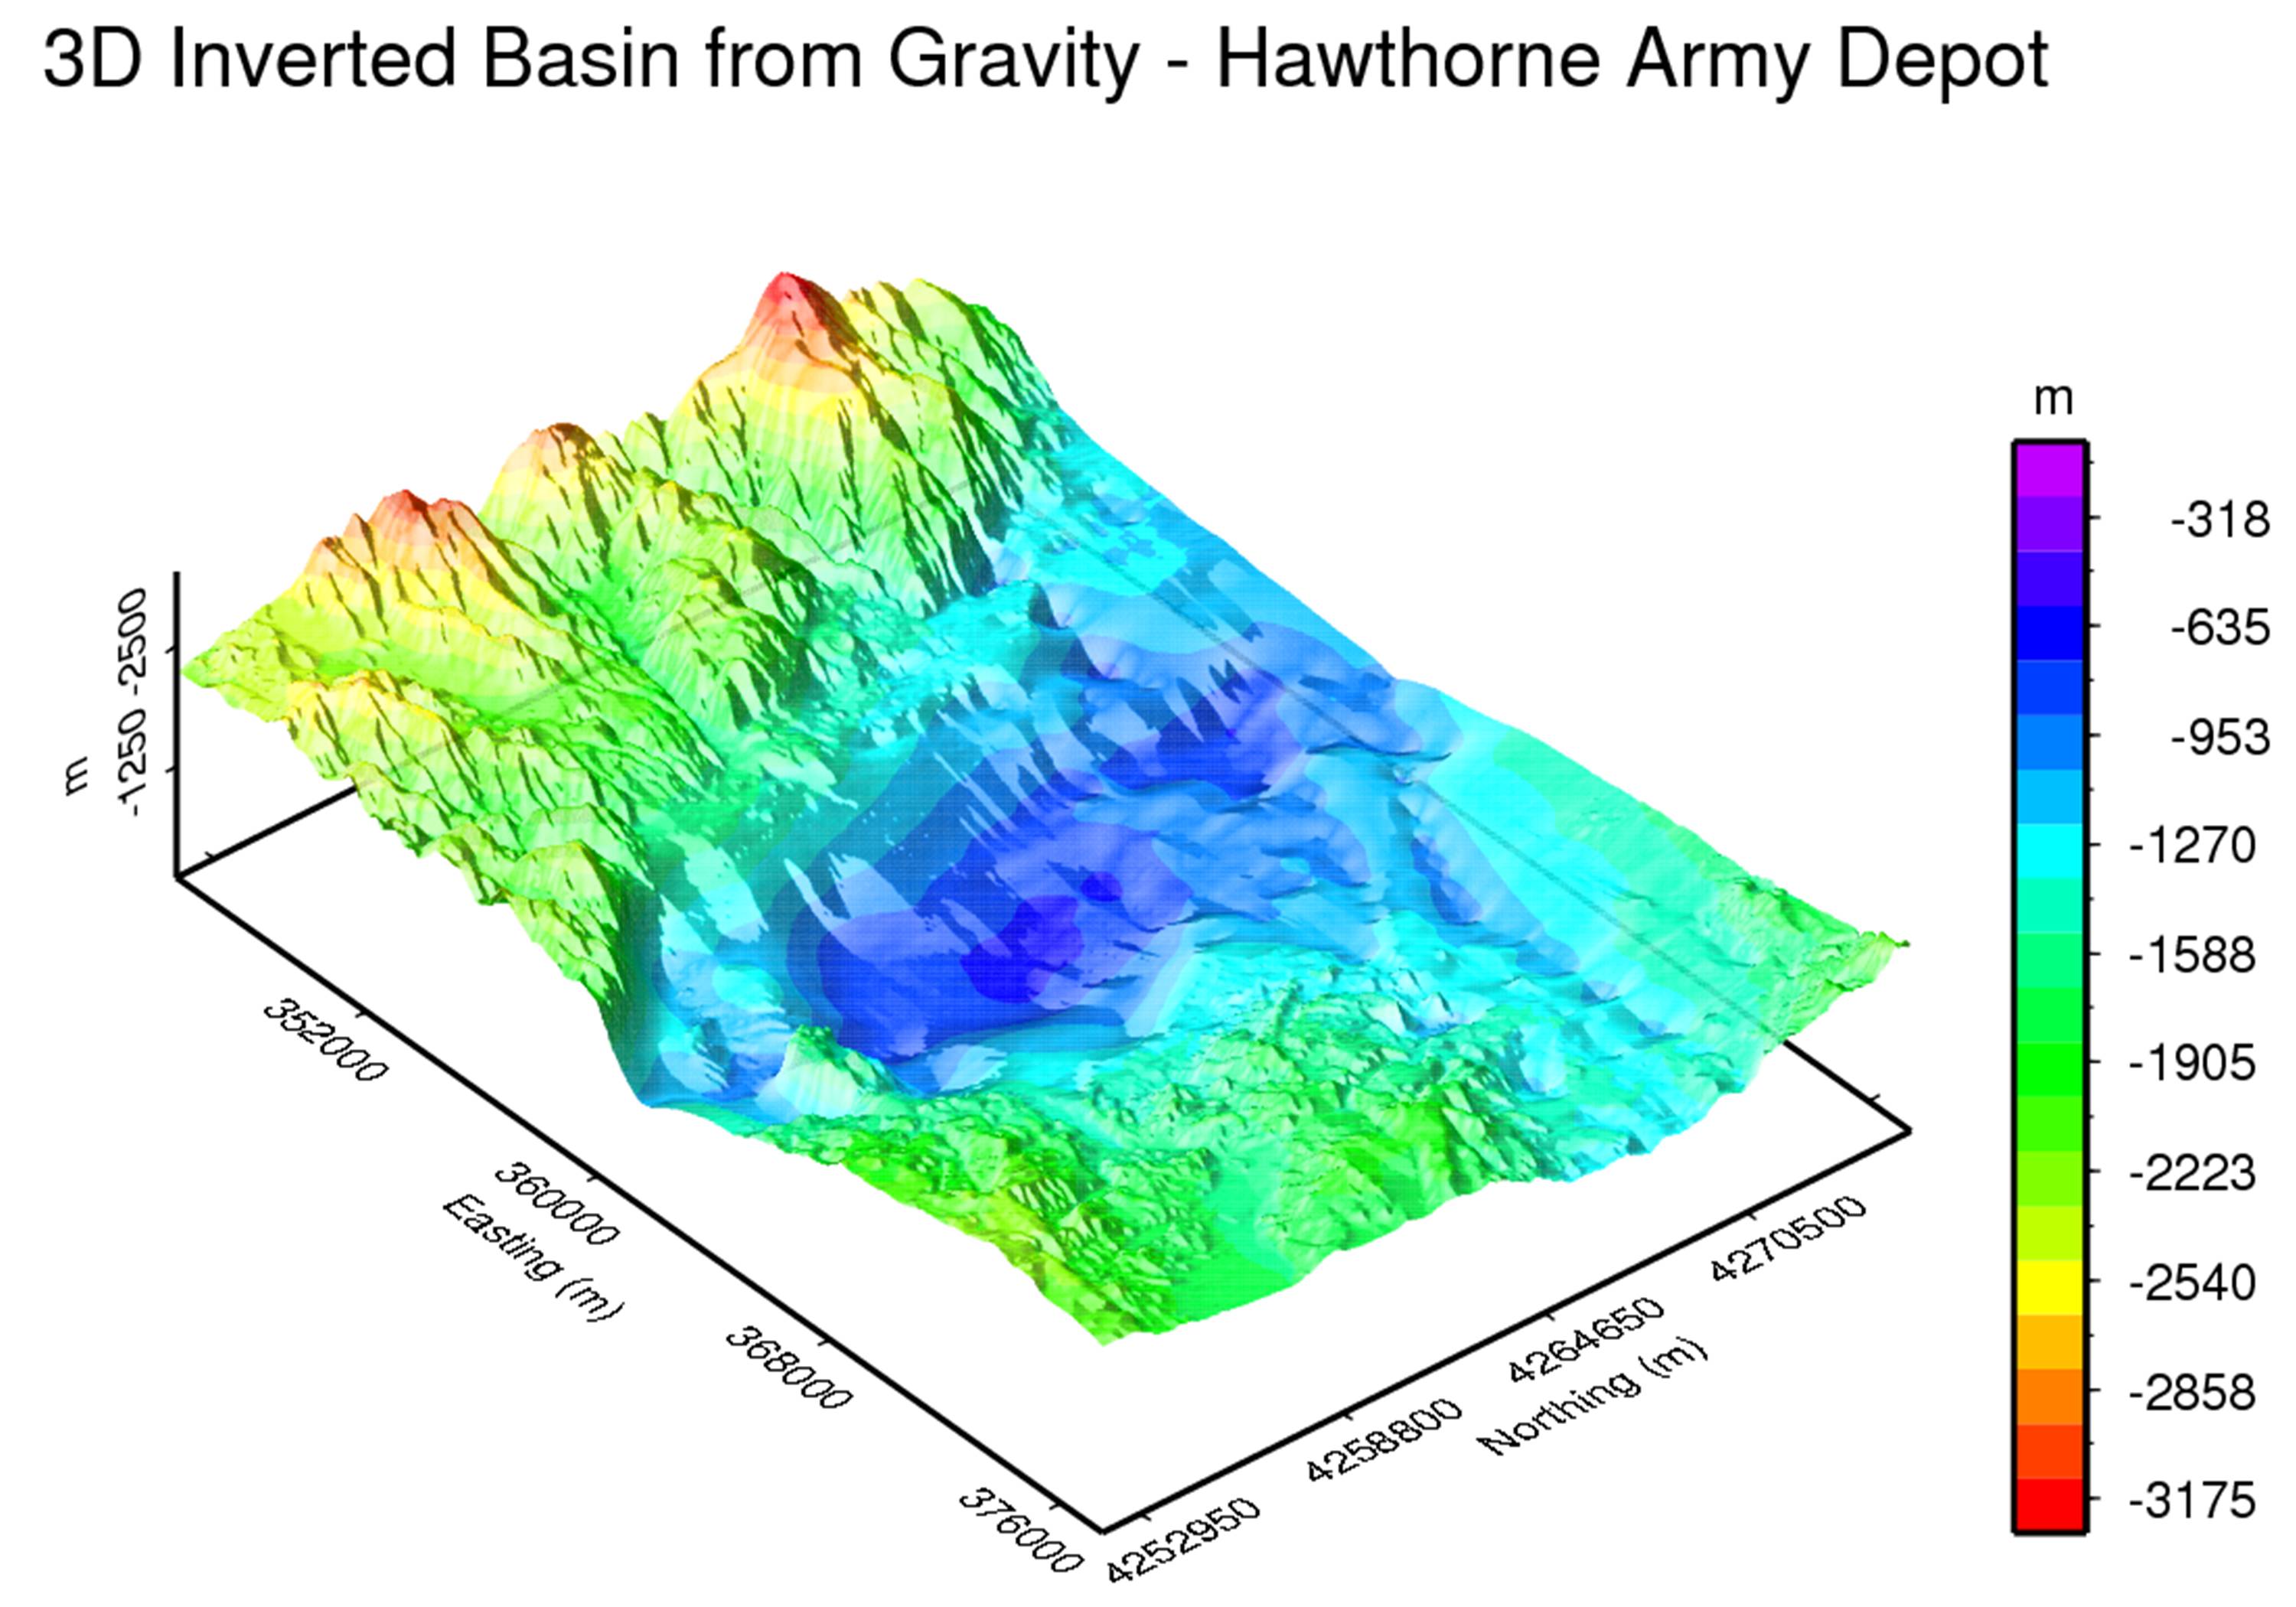 3D Inverted Basin from Gravity - Hawthorne Army Depot